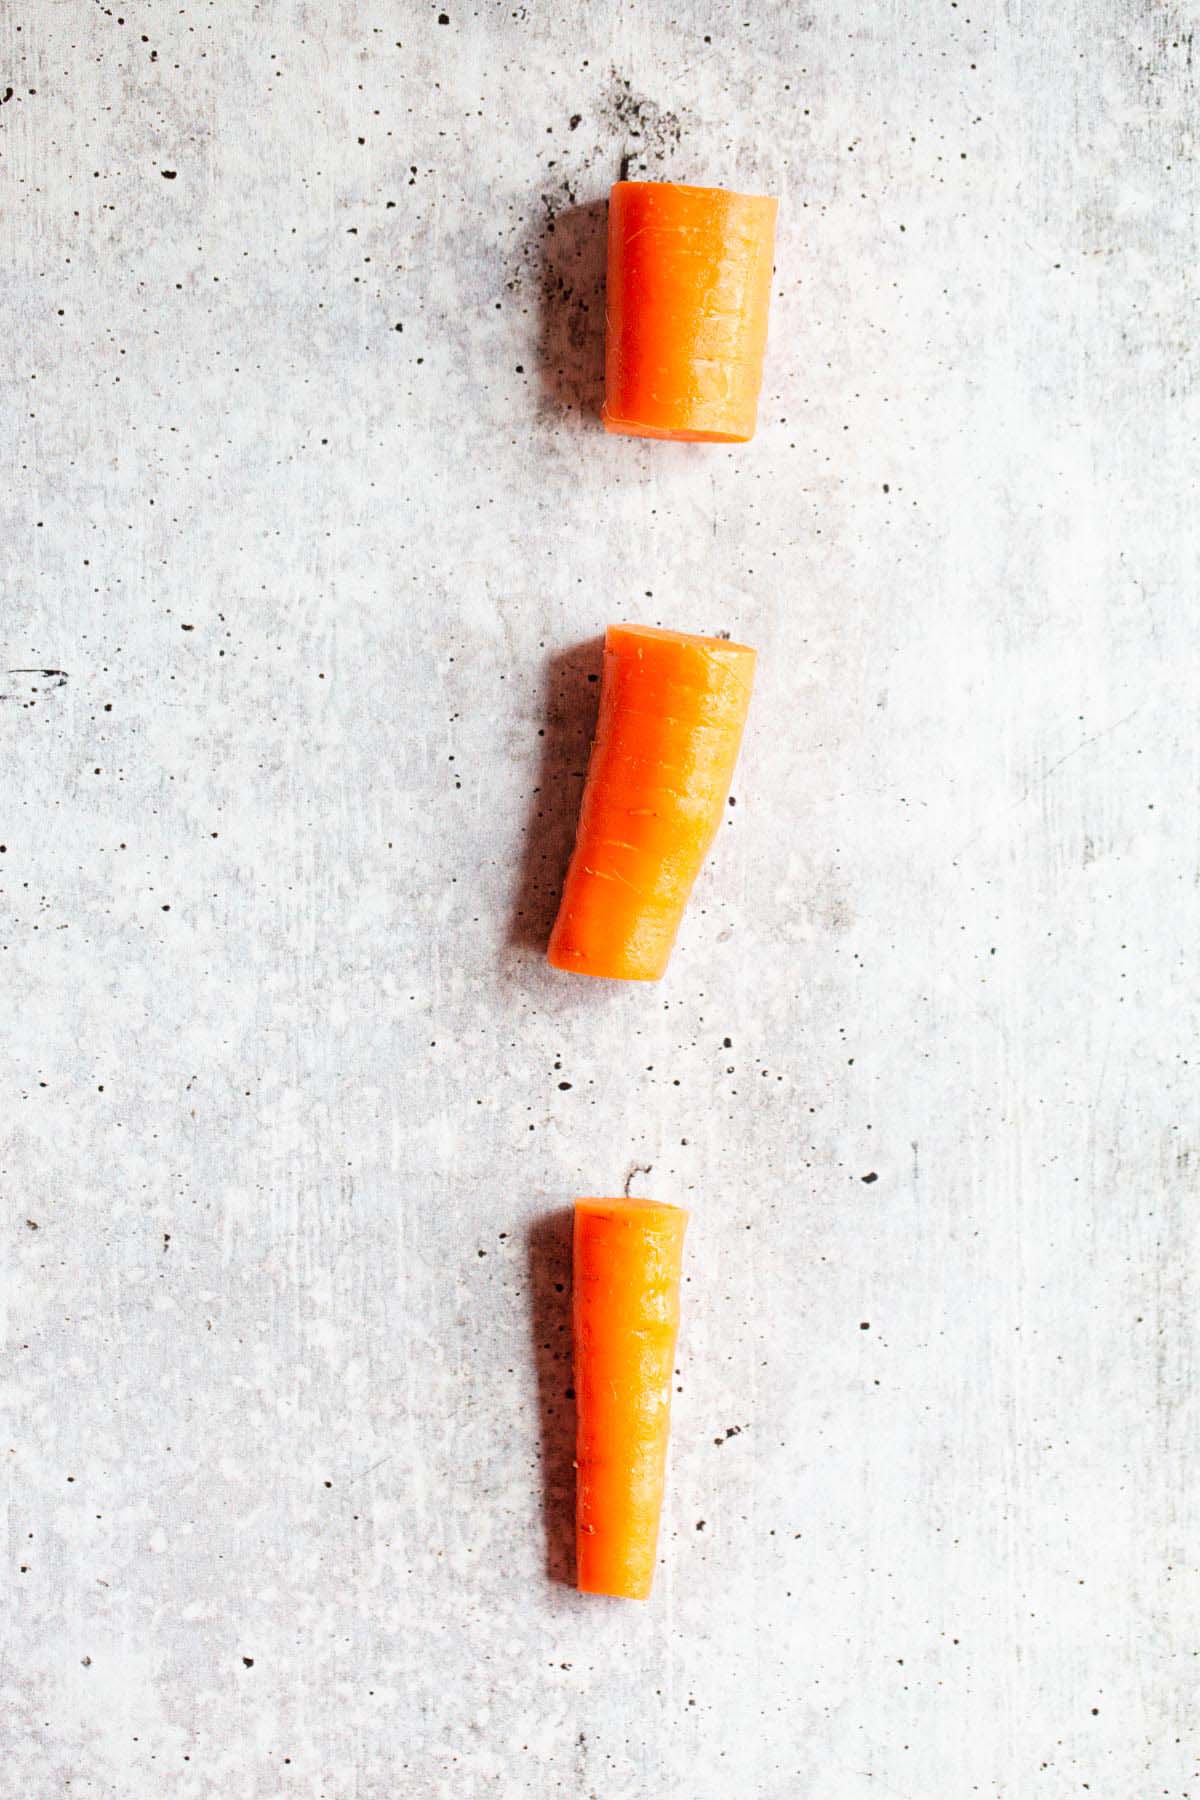 Carrot sliced into three sections.